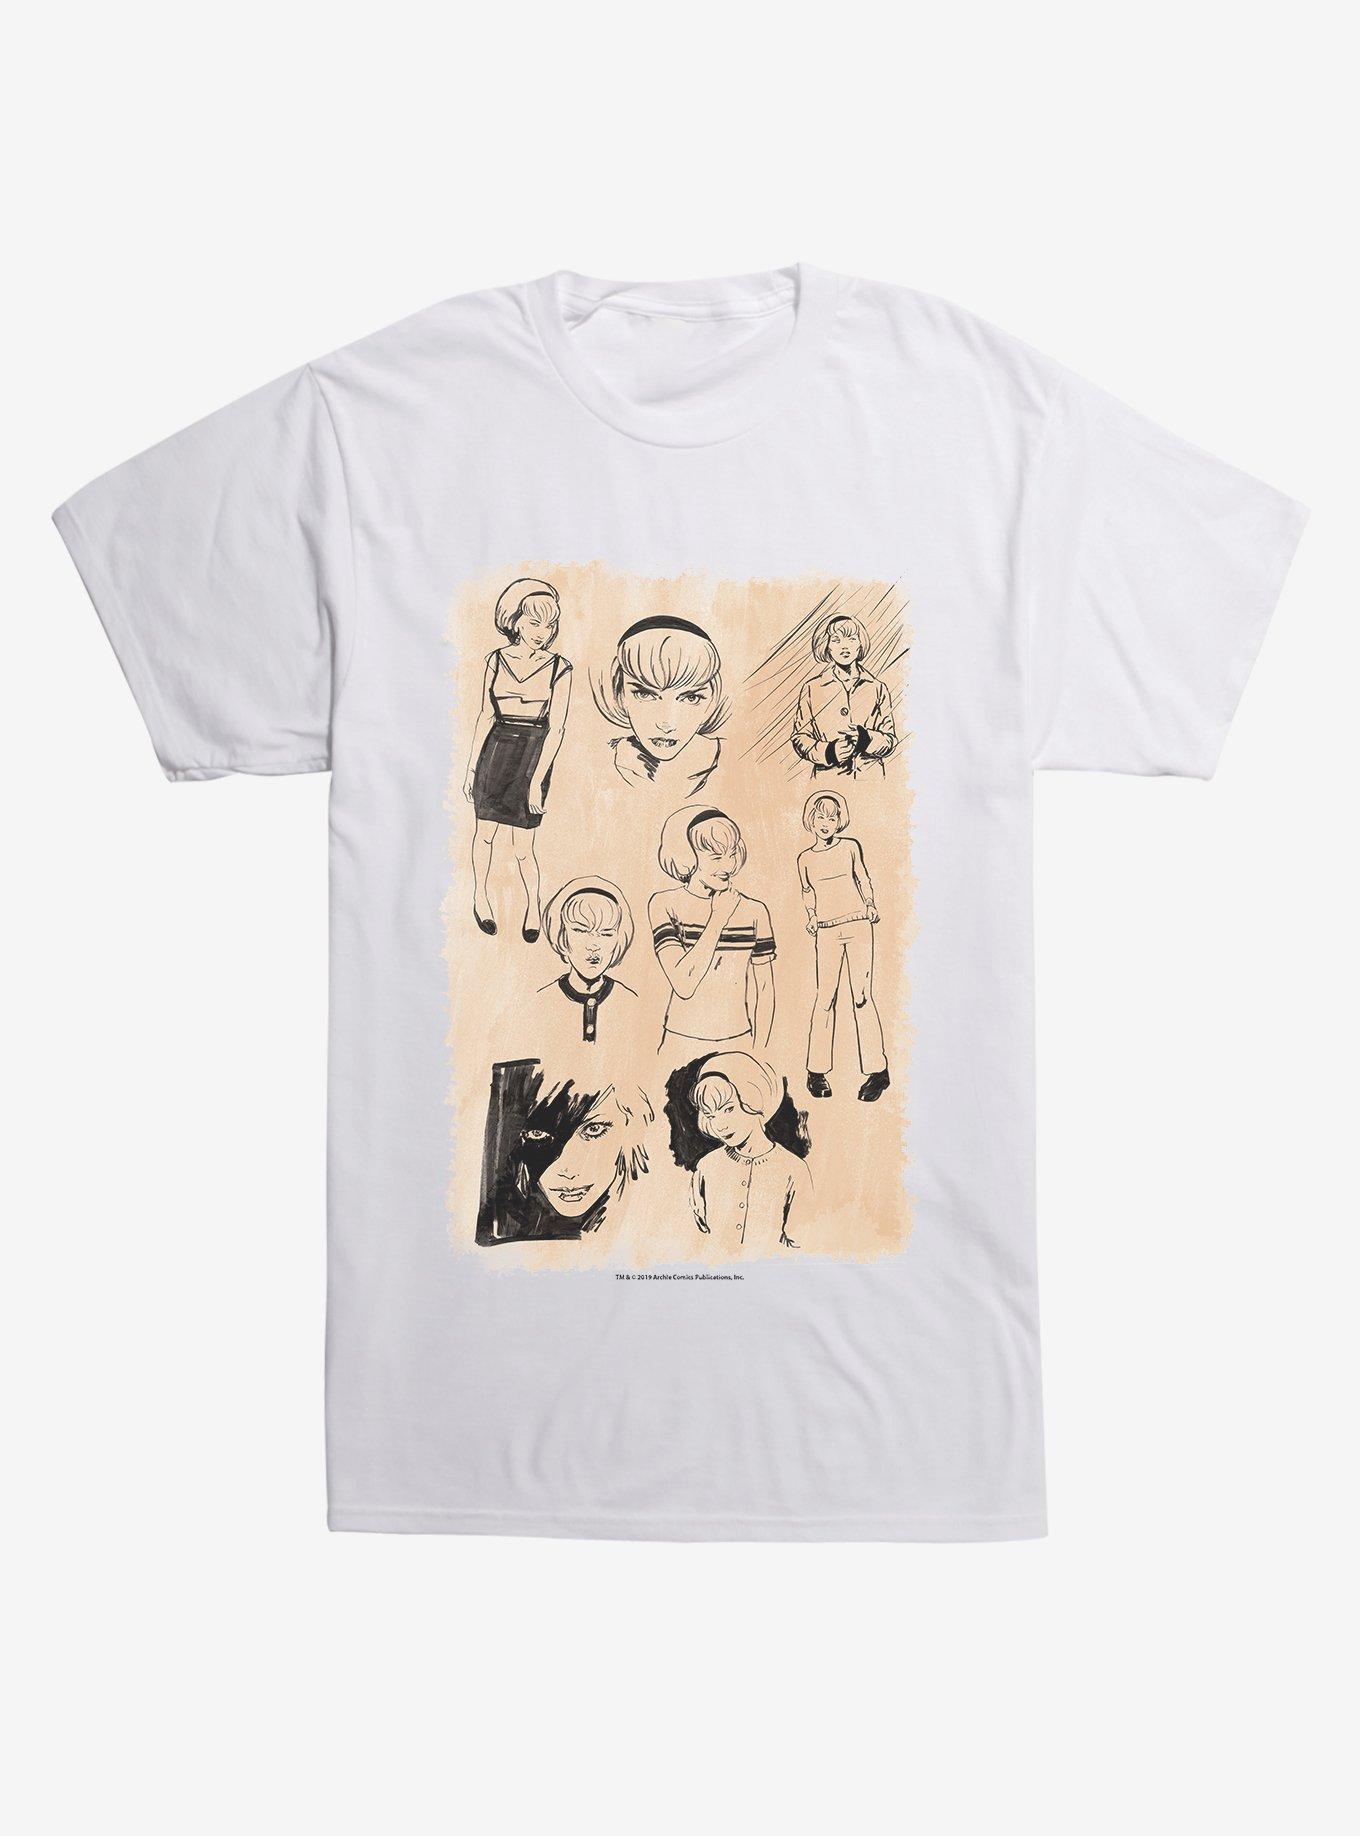 Chilling Adventures Of Sabrina Sketches White T-Shirt, WHITE, hi-res